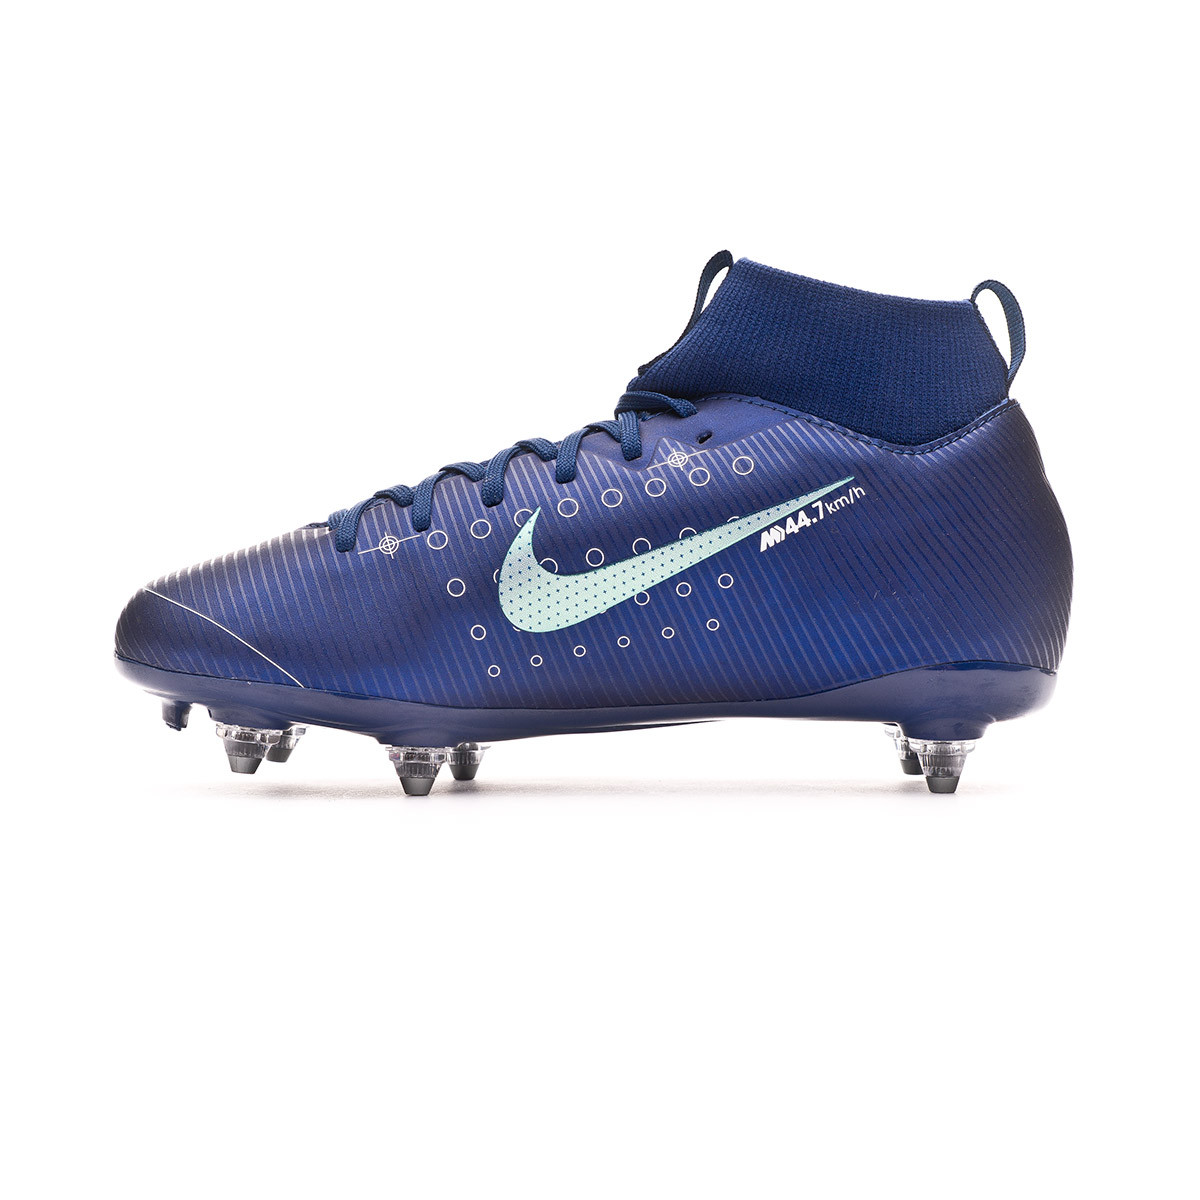 Nike Mercurial Superfly 7 Academy MG Men 's Soccer Cleats.